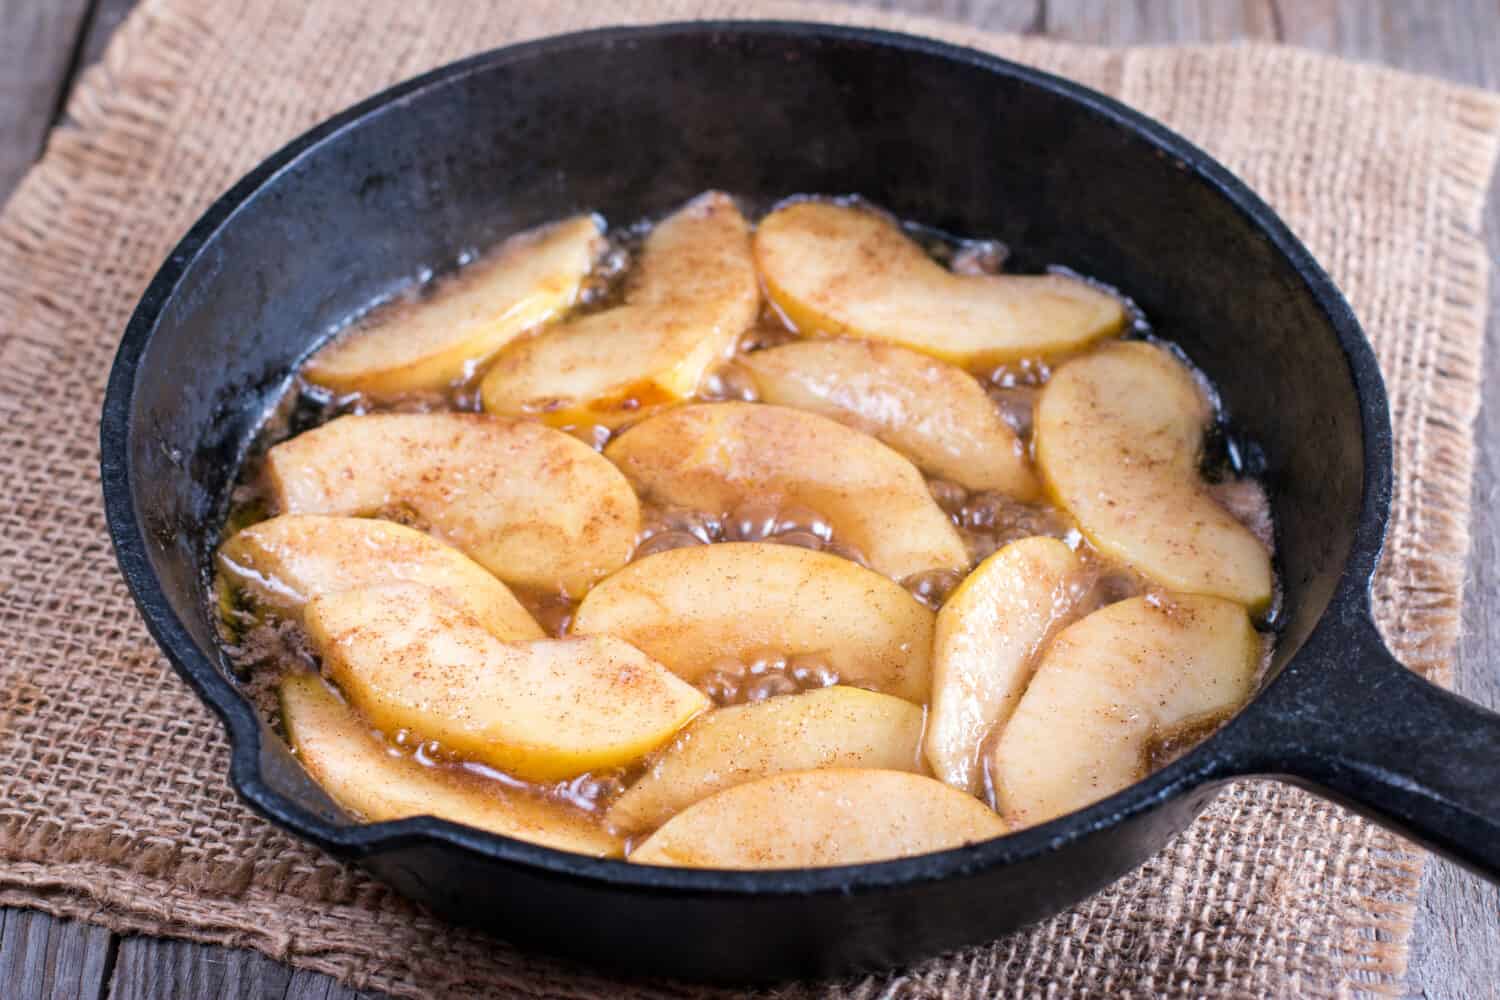 Cooking apple in a frying pan